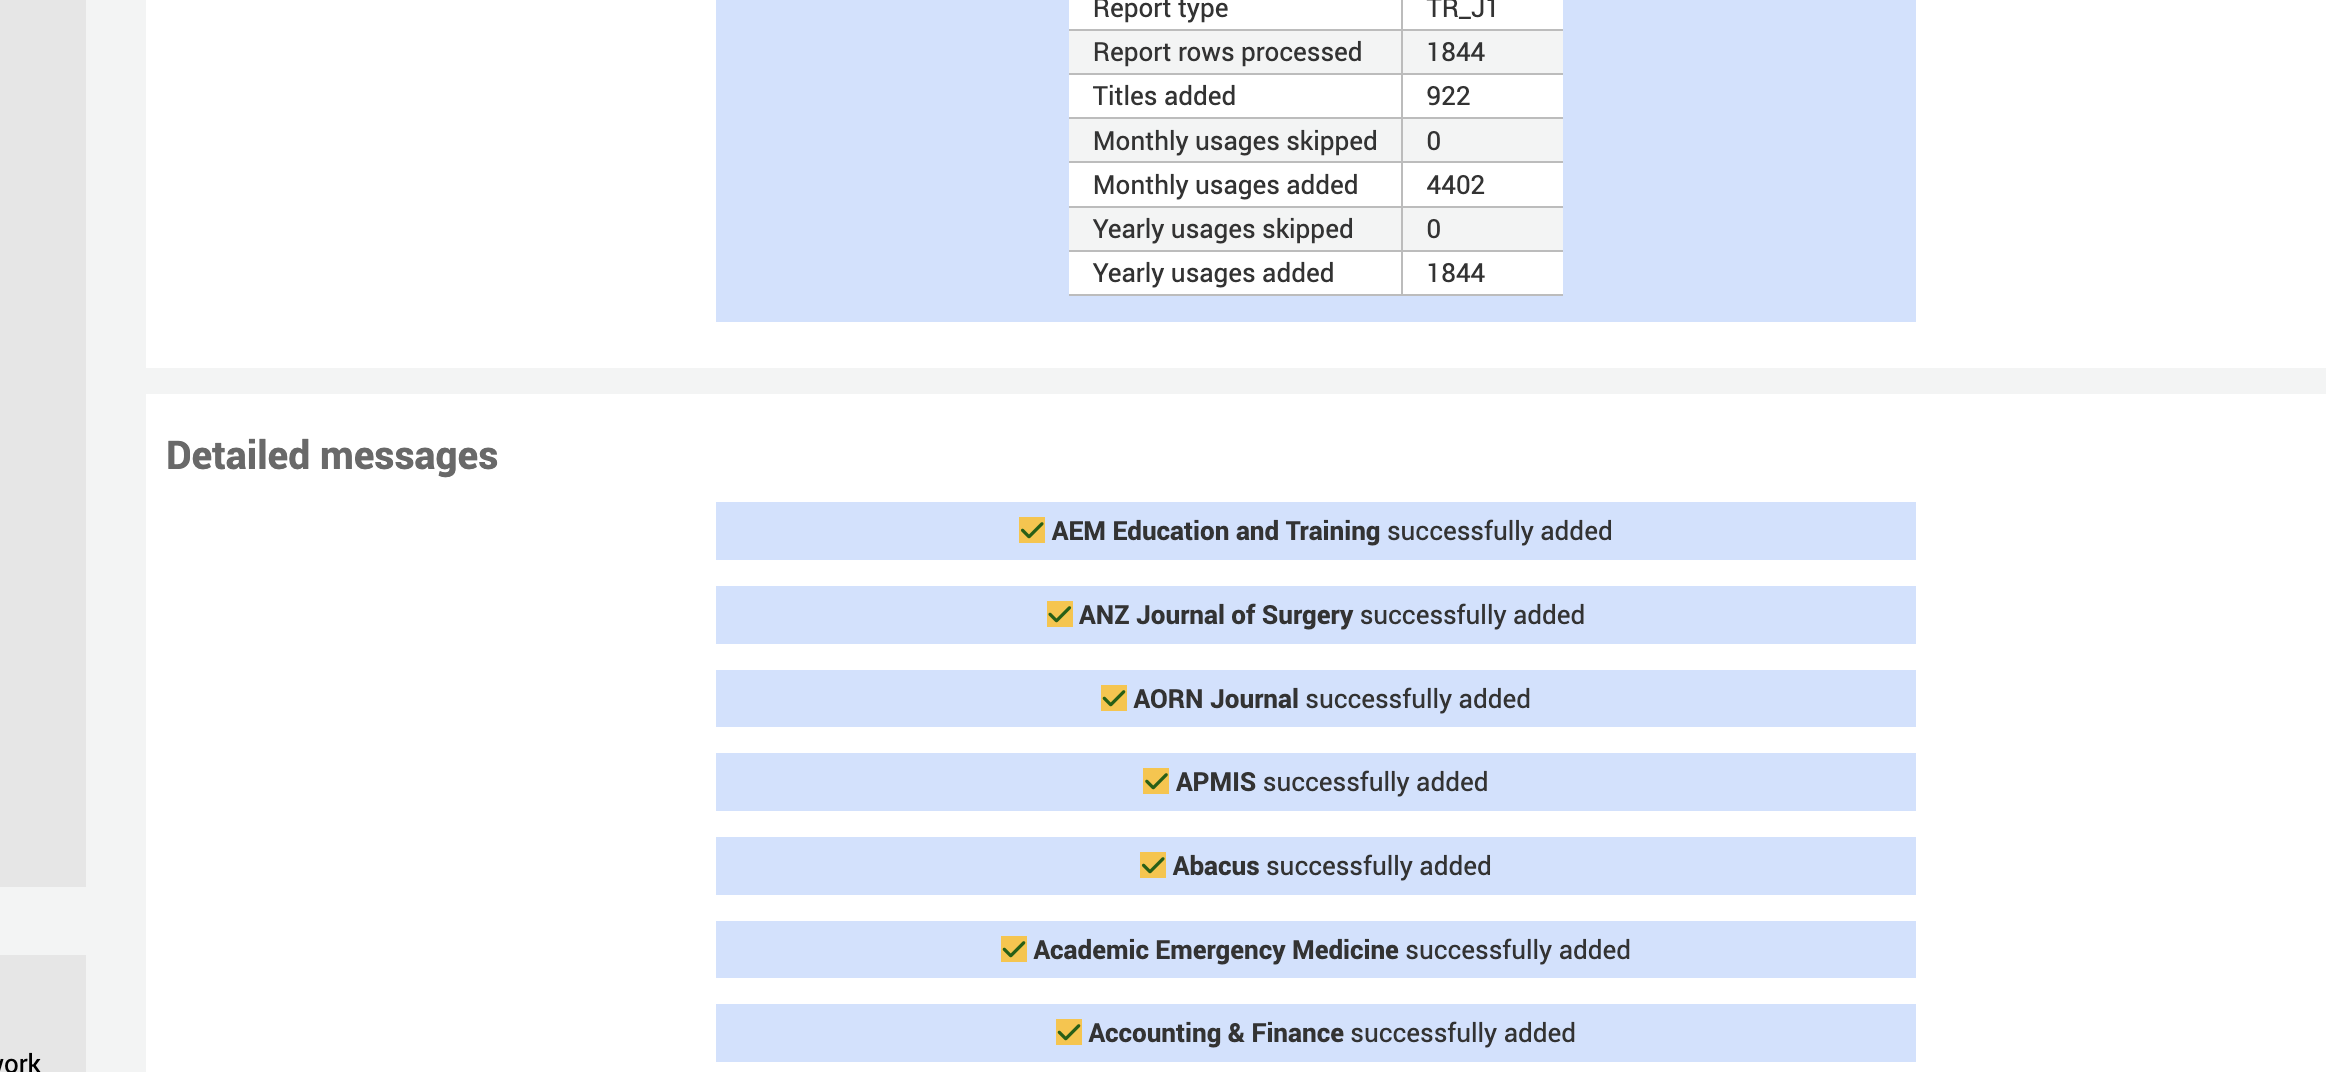 A view of the harvesting job summary, with a table saying 922 titles were added. A section underneath called Detailed messages has information such as "ANZ Journal of surgery successfully added".